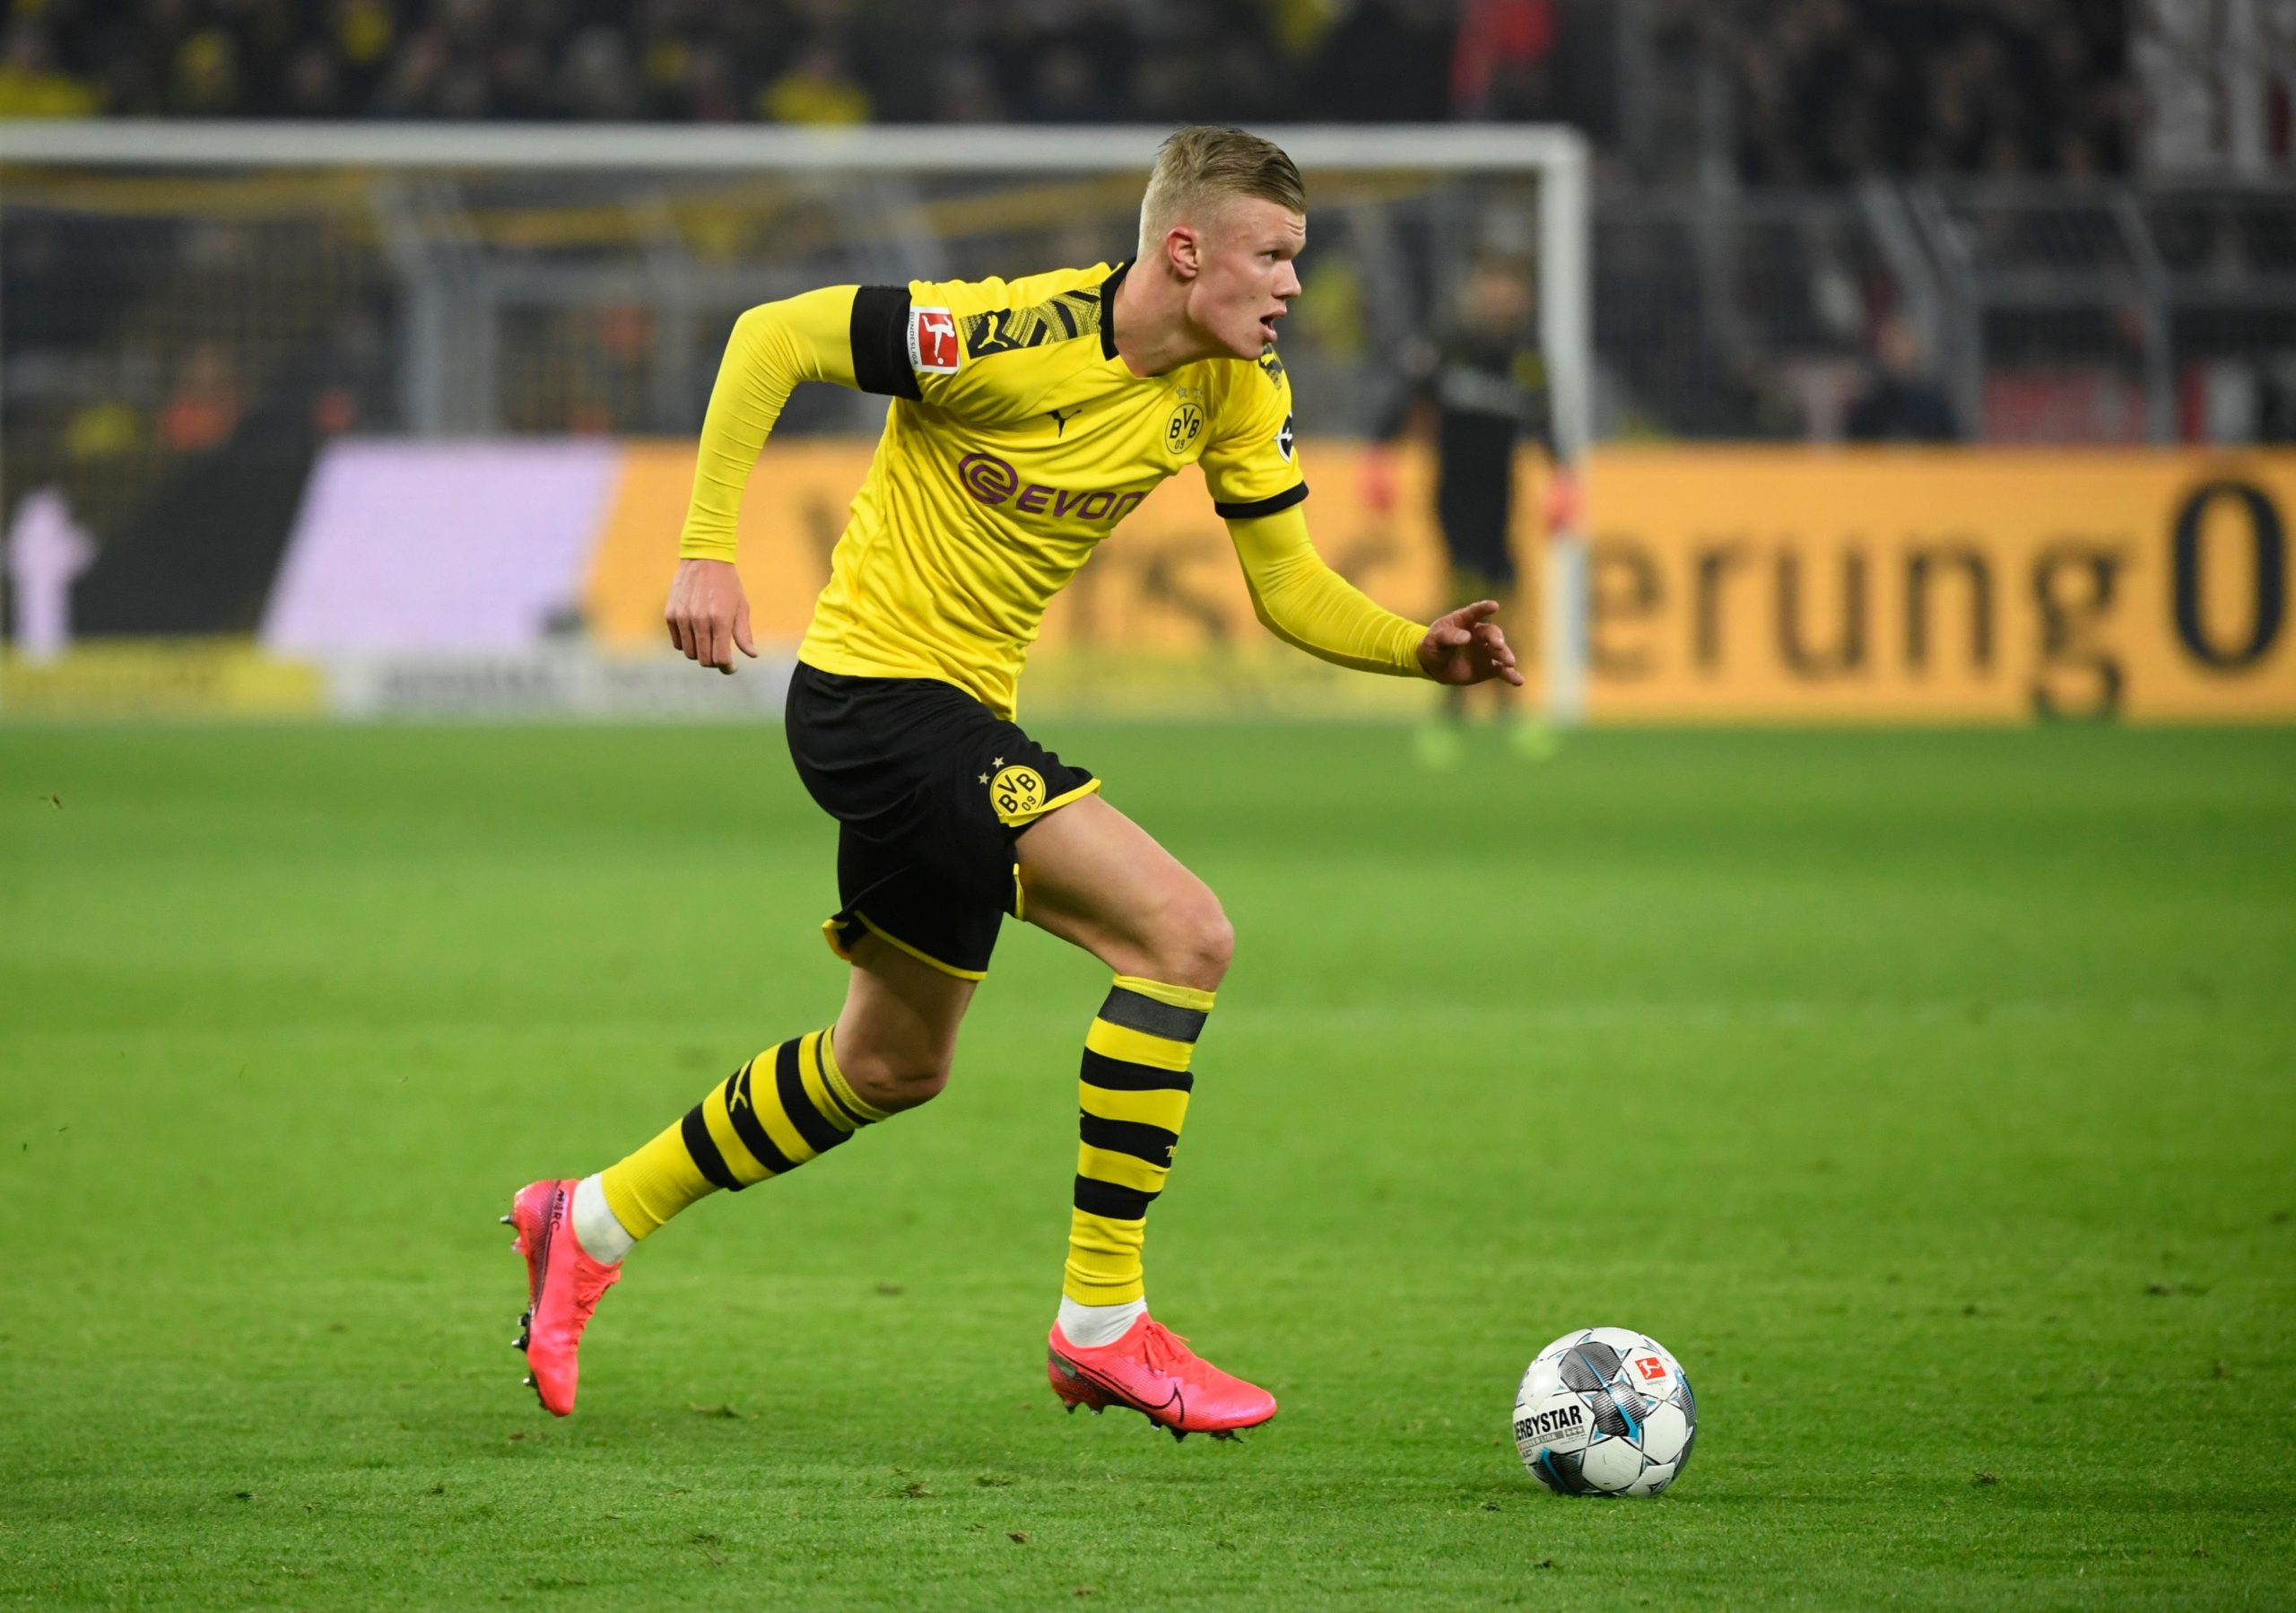 Dortmund's Norwegian forward Erling Braut Haaland runs with the ball during the German first division Bundesliga football match Borussia Dortmund v FC Cologne in Dortmund, on January 24, 2020. (Photo by Ina FASSBENDER / AFP) / DFL REGULATIONS PROHIBIT ANY USE OF PHOTOGRAPHS AS IMAGE SEQUENCES AND/OR QUASI-VIDEO (Photo by INA FASSBENDER/AFP via Getty Images)